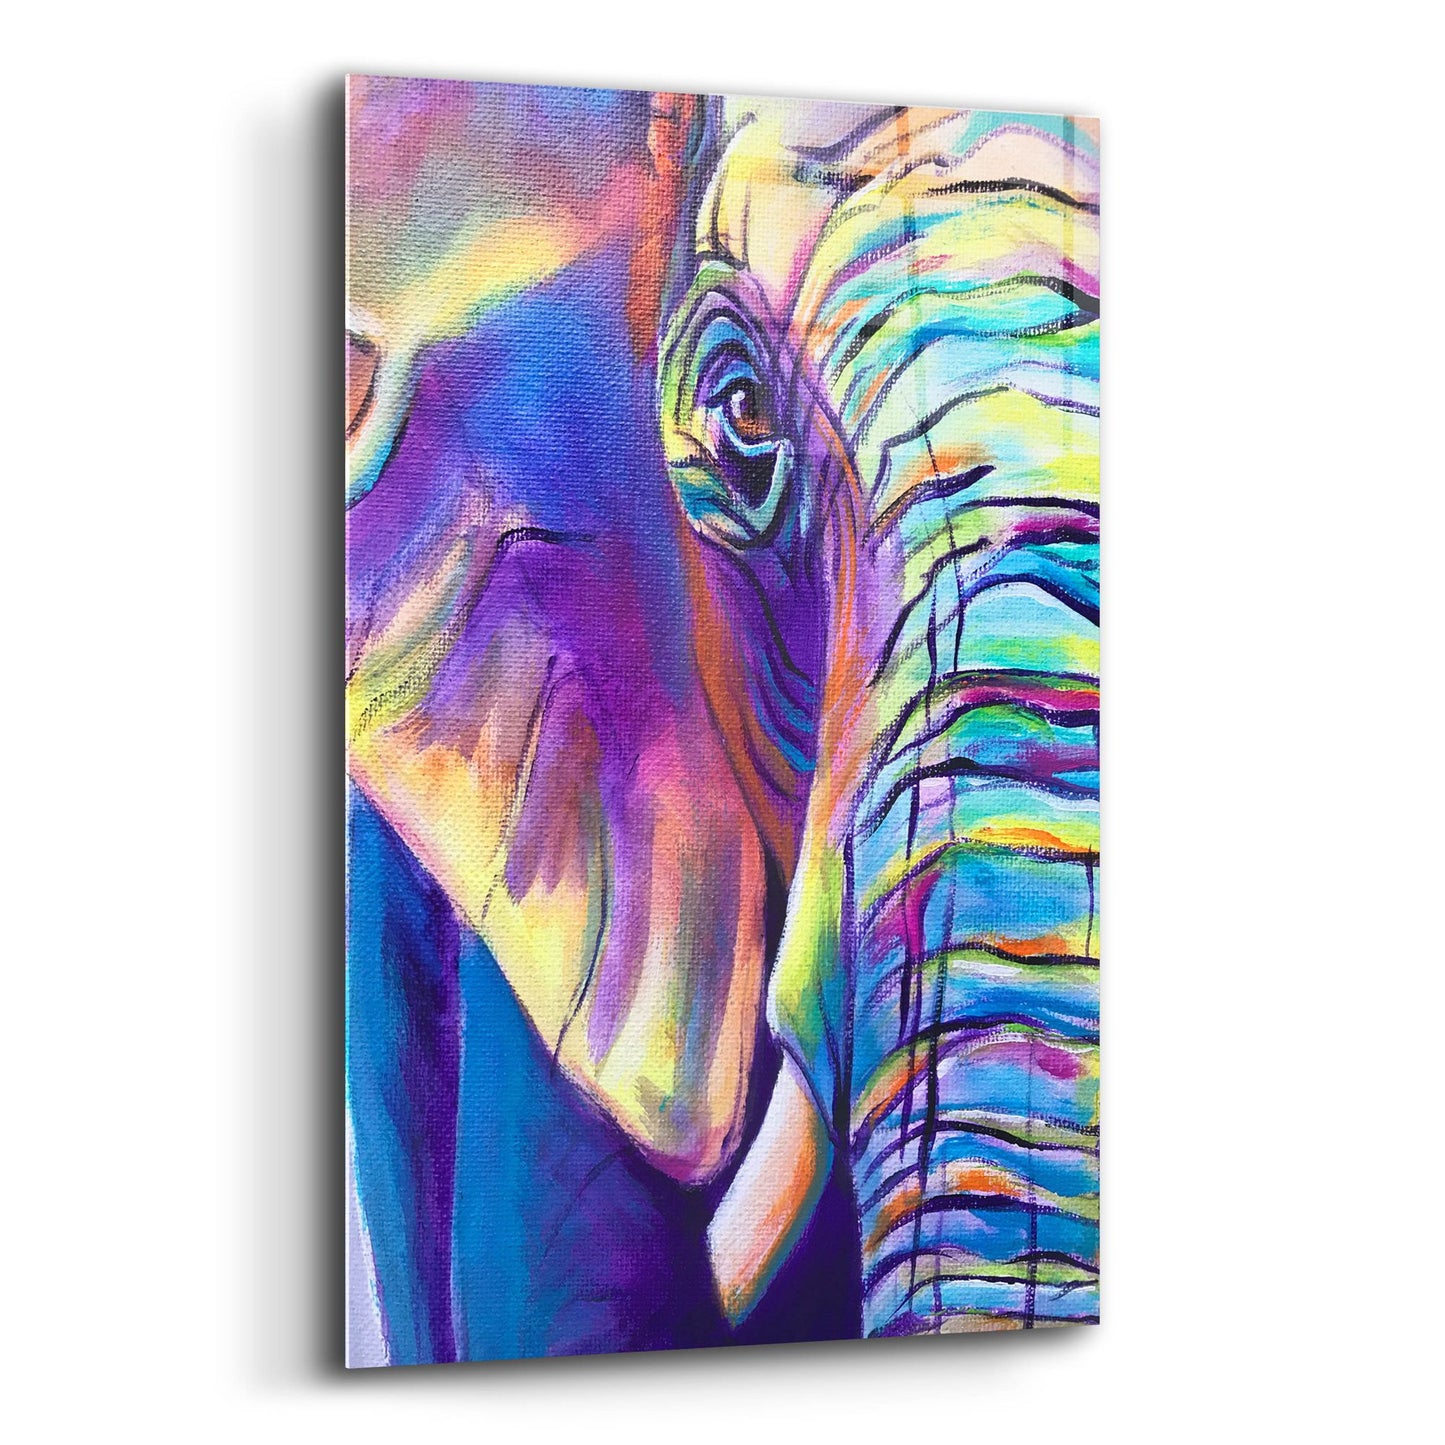 Epic Art 'Elephant - Butterfly Left2 by Dawg Painter, Acrylic Glass Wall Art,16x24